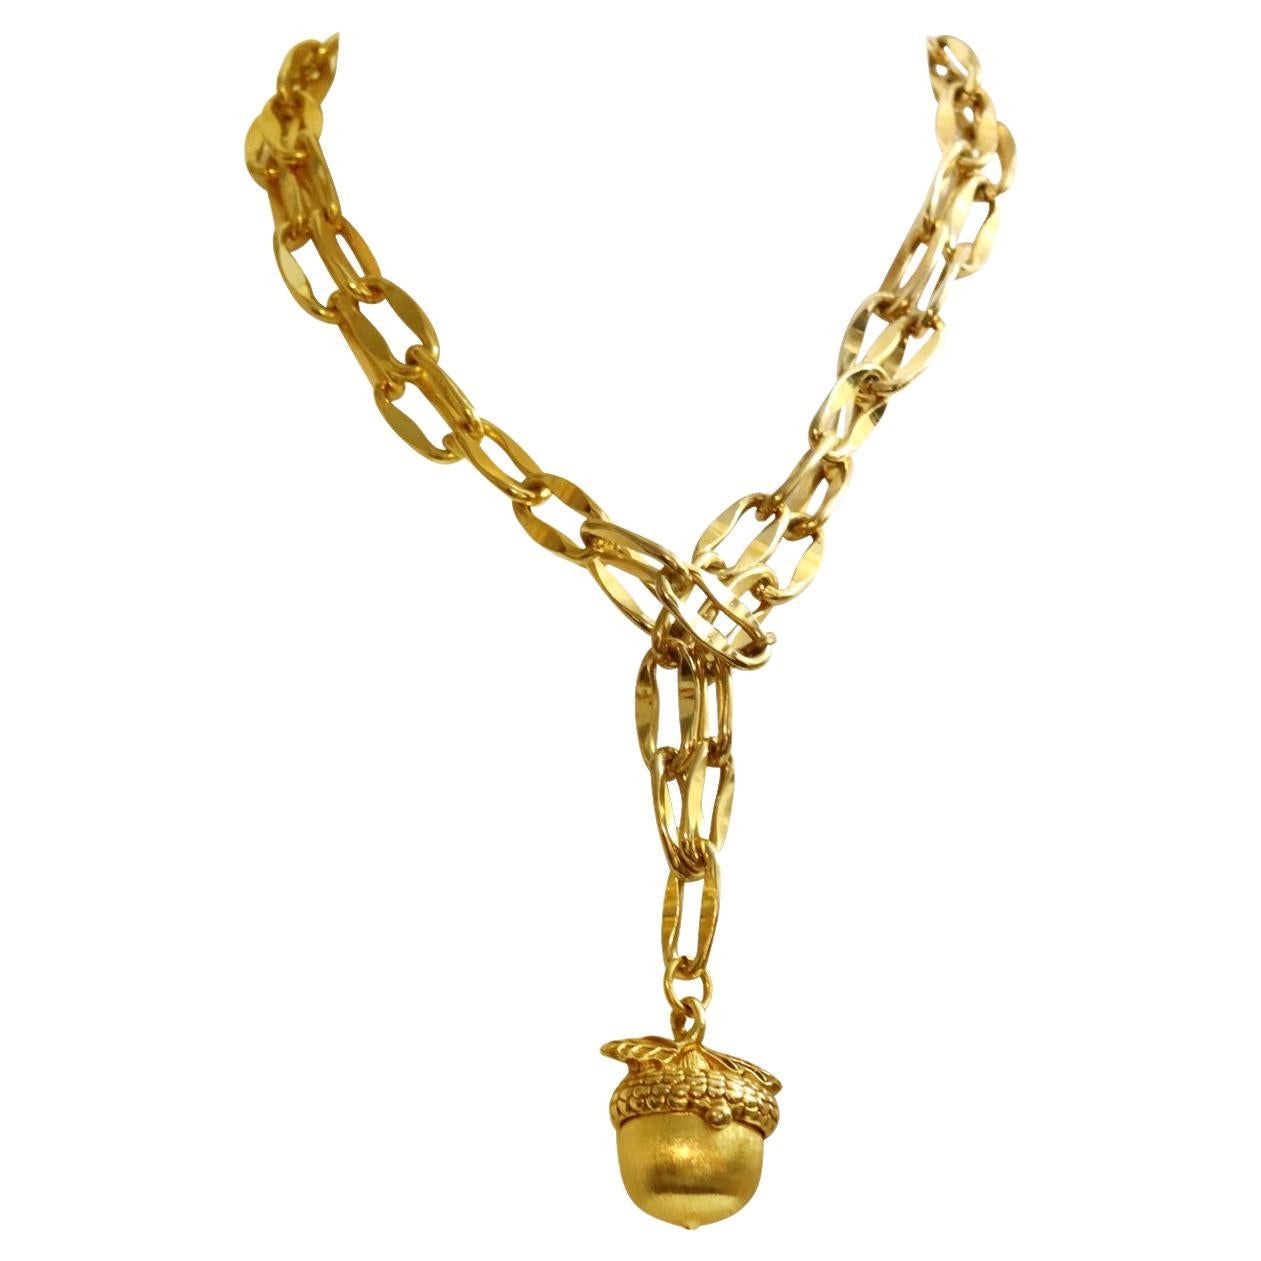 Vintage Gold Tone Long Link Chain with Dangling Opening Fob Circa 1980's For Sale